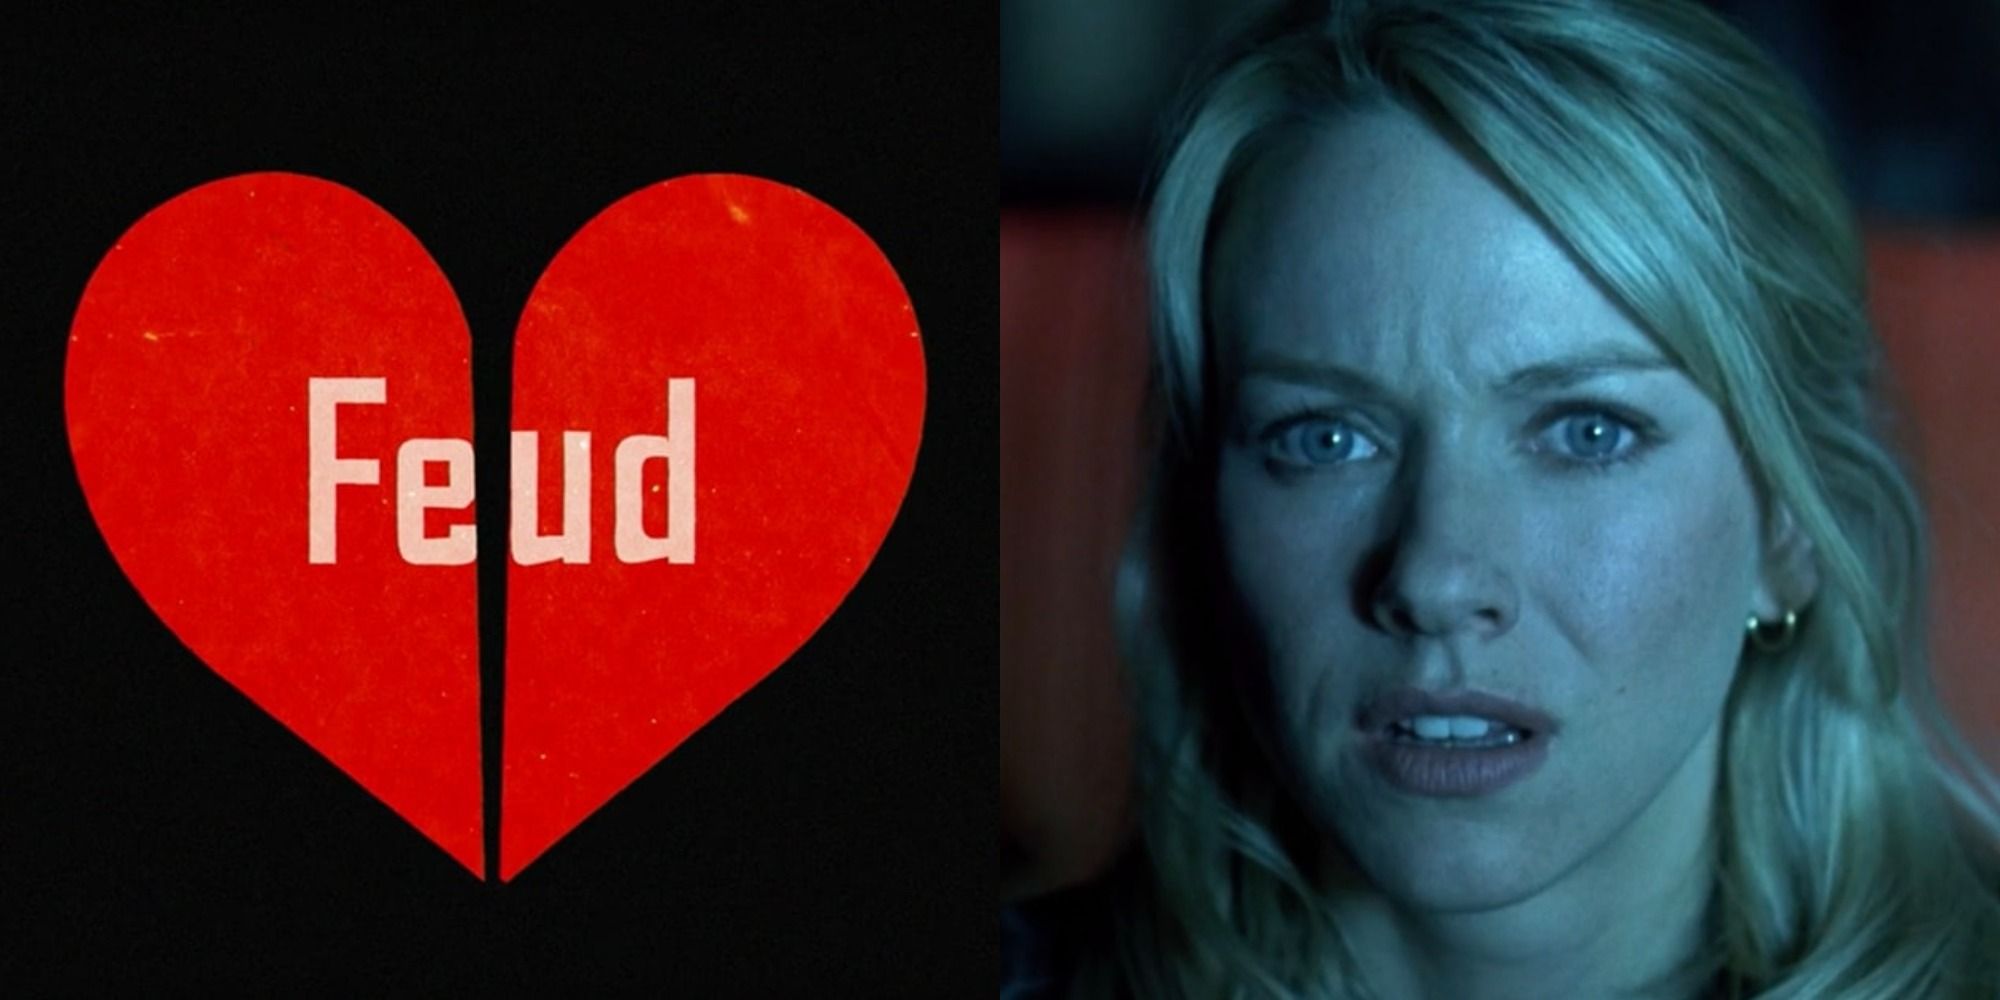 Split image of the main titles of FX's Feud and Season 2 star Naomi Watts